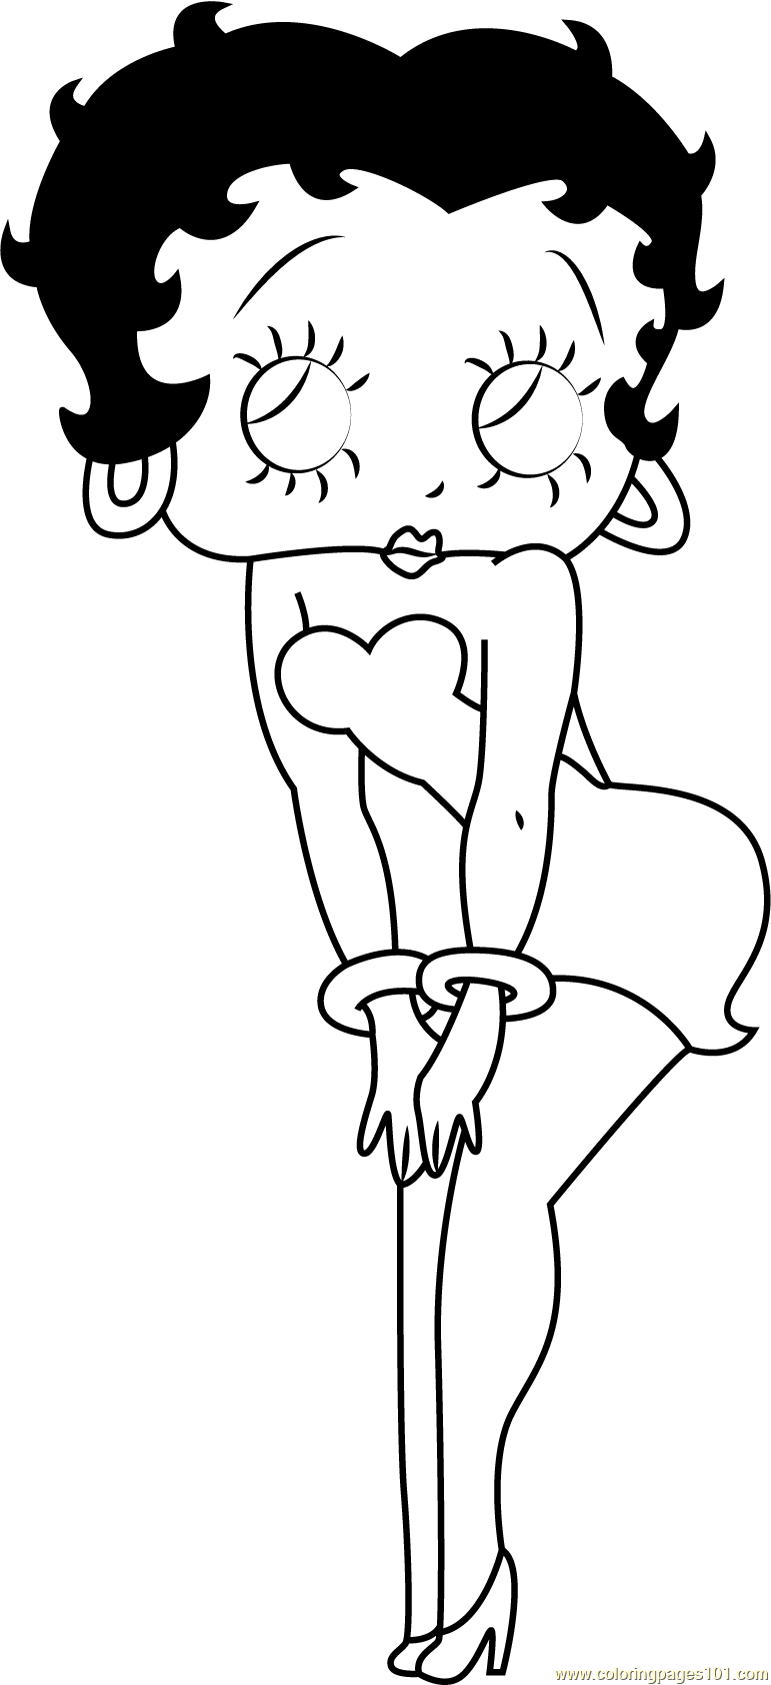 Betty Boop Looking Up Coloring Page for Kids - Free Betty Boop